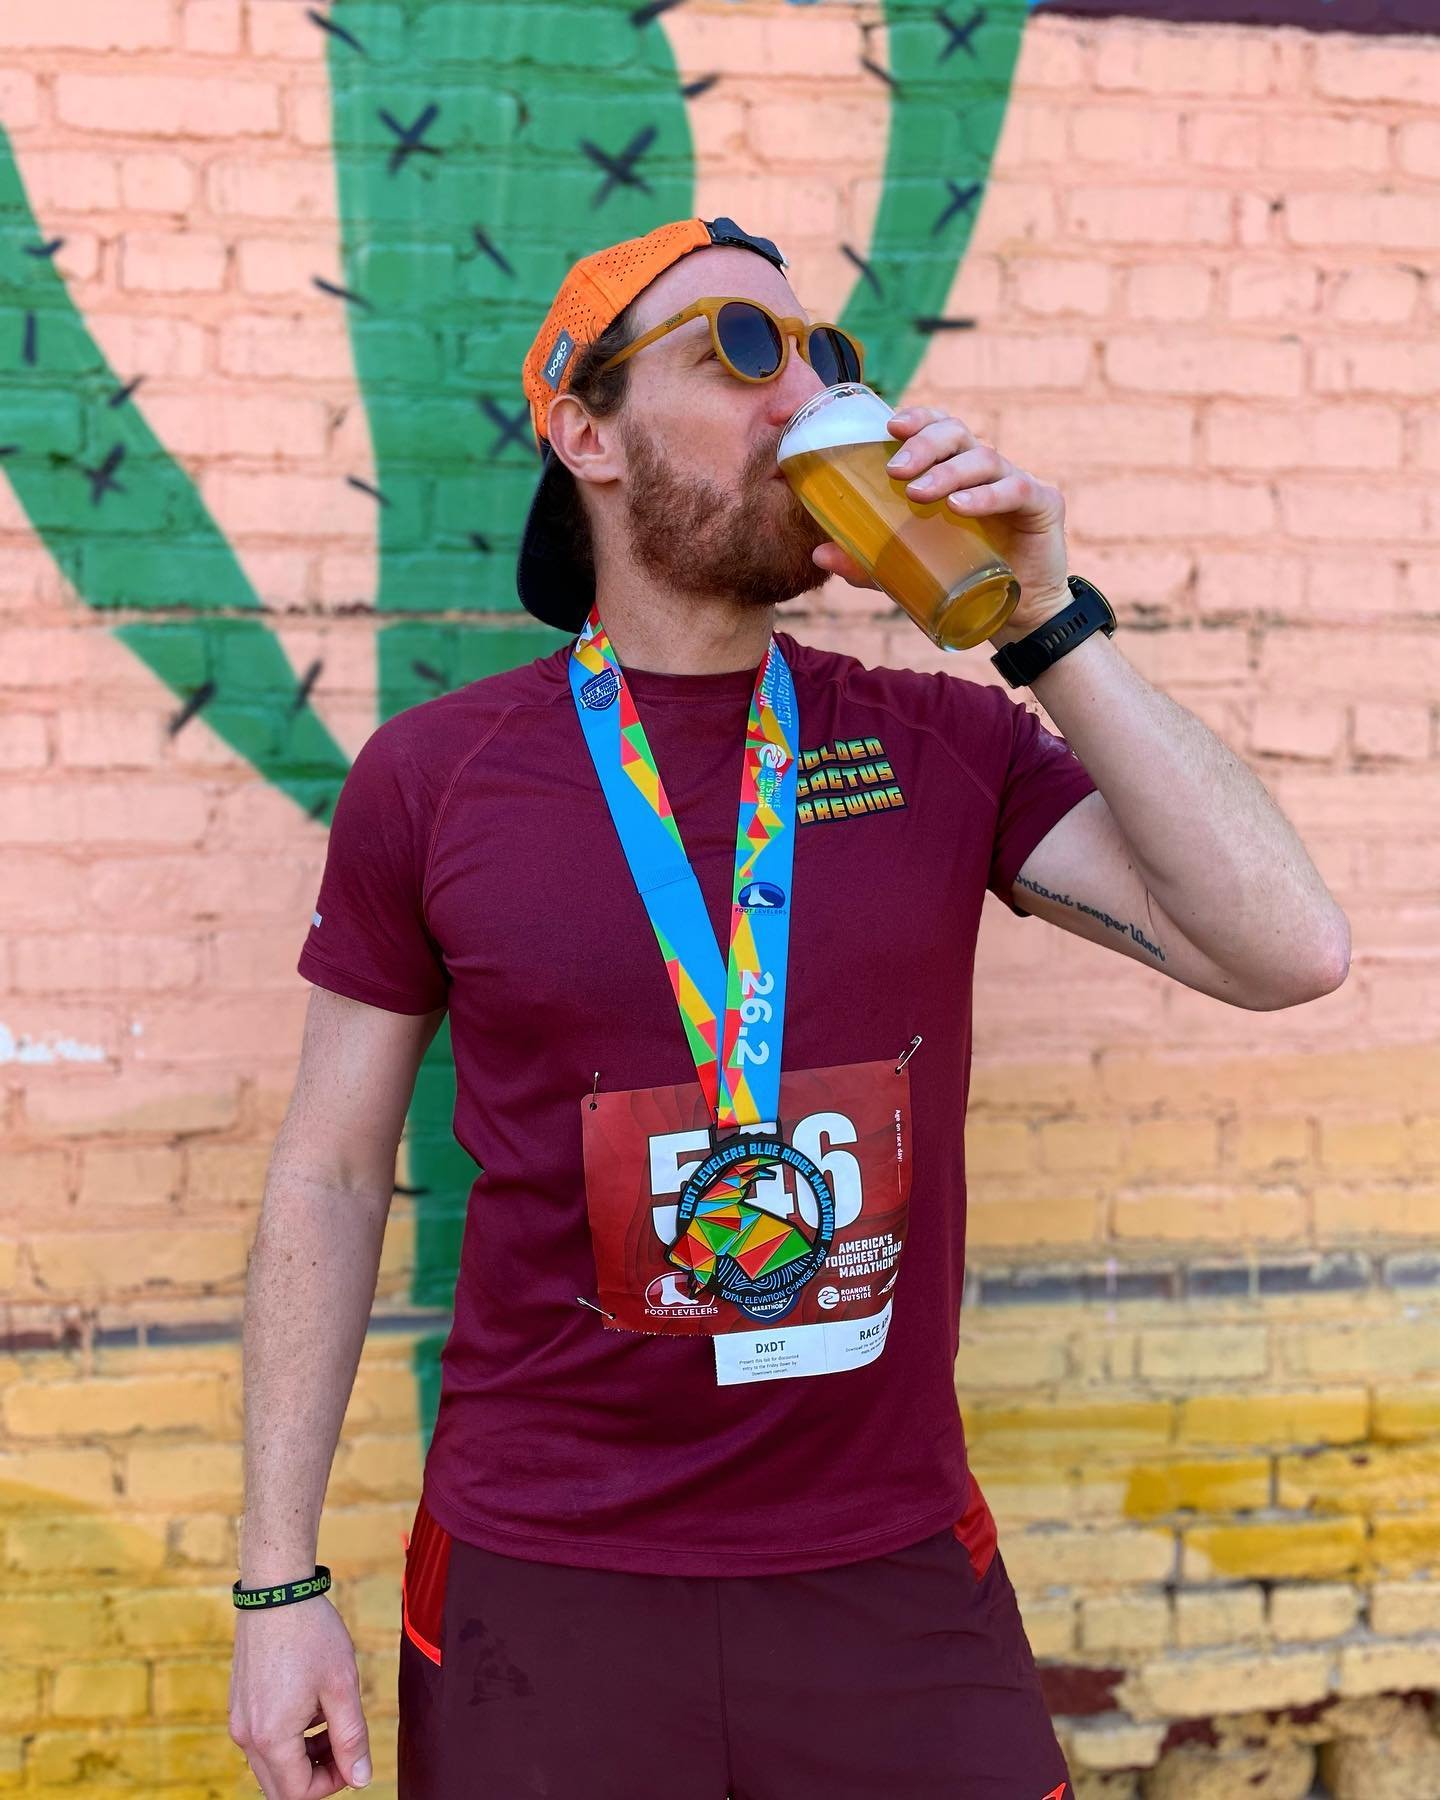 That first sip feel 🍻🏃 BIG congratulations to one of our finest beertenders for completing the @blueridgemarathon yesterday!! We&rsquo;re honored you took GC along the way. Hope everyone who participated is having a rainy recoup day, stop by and gr